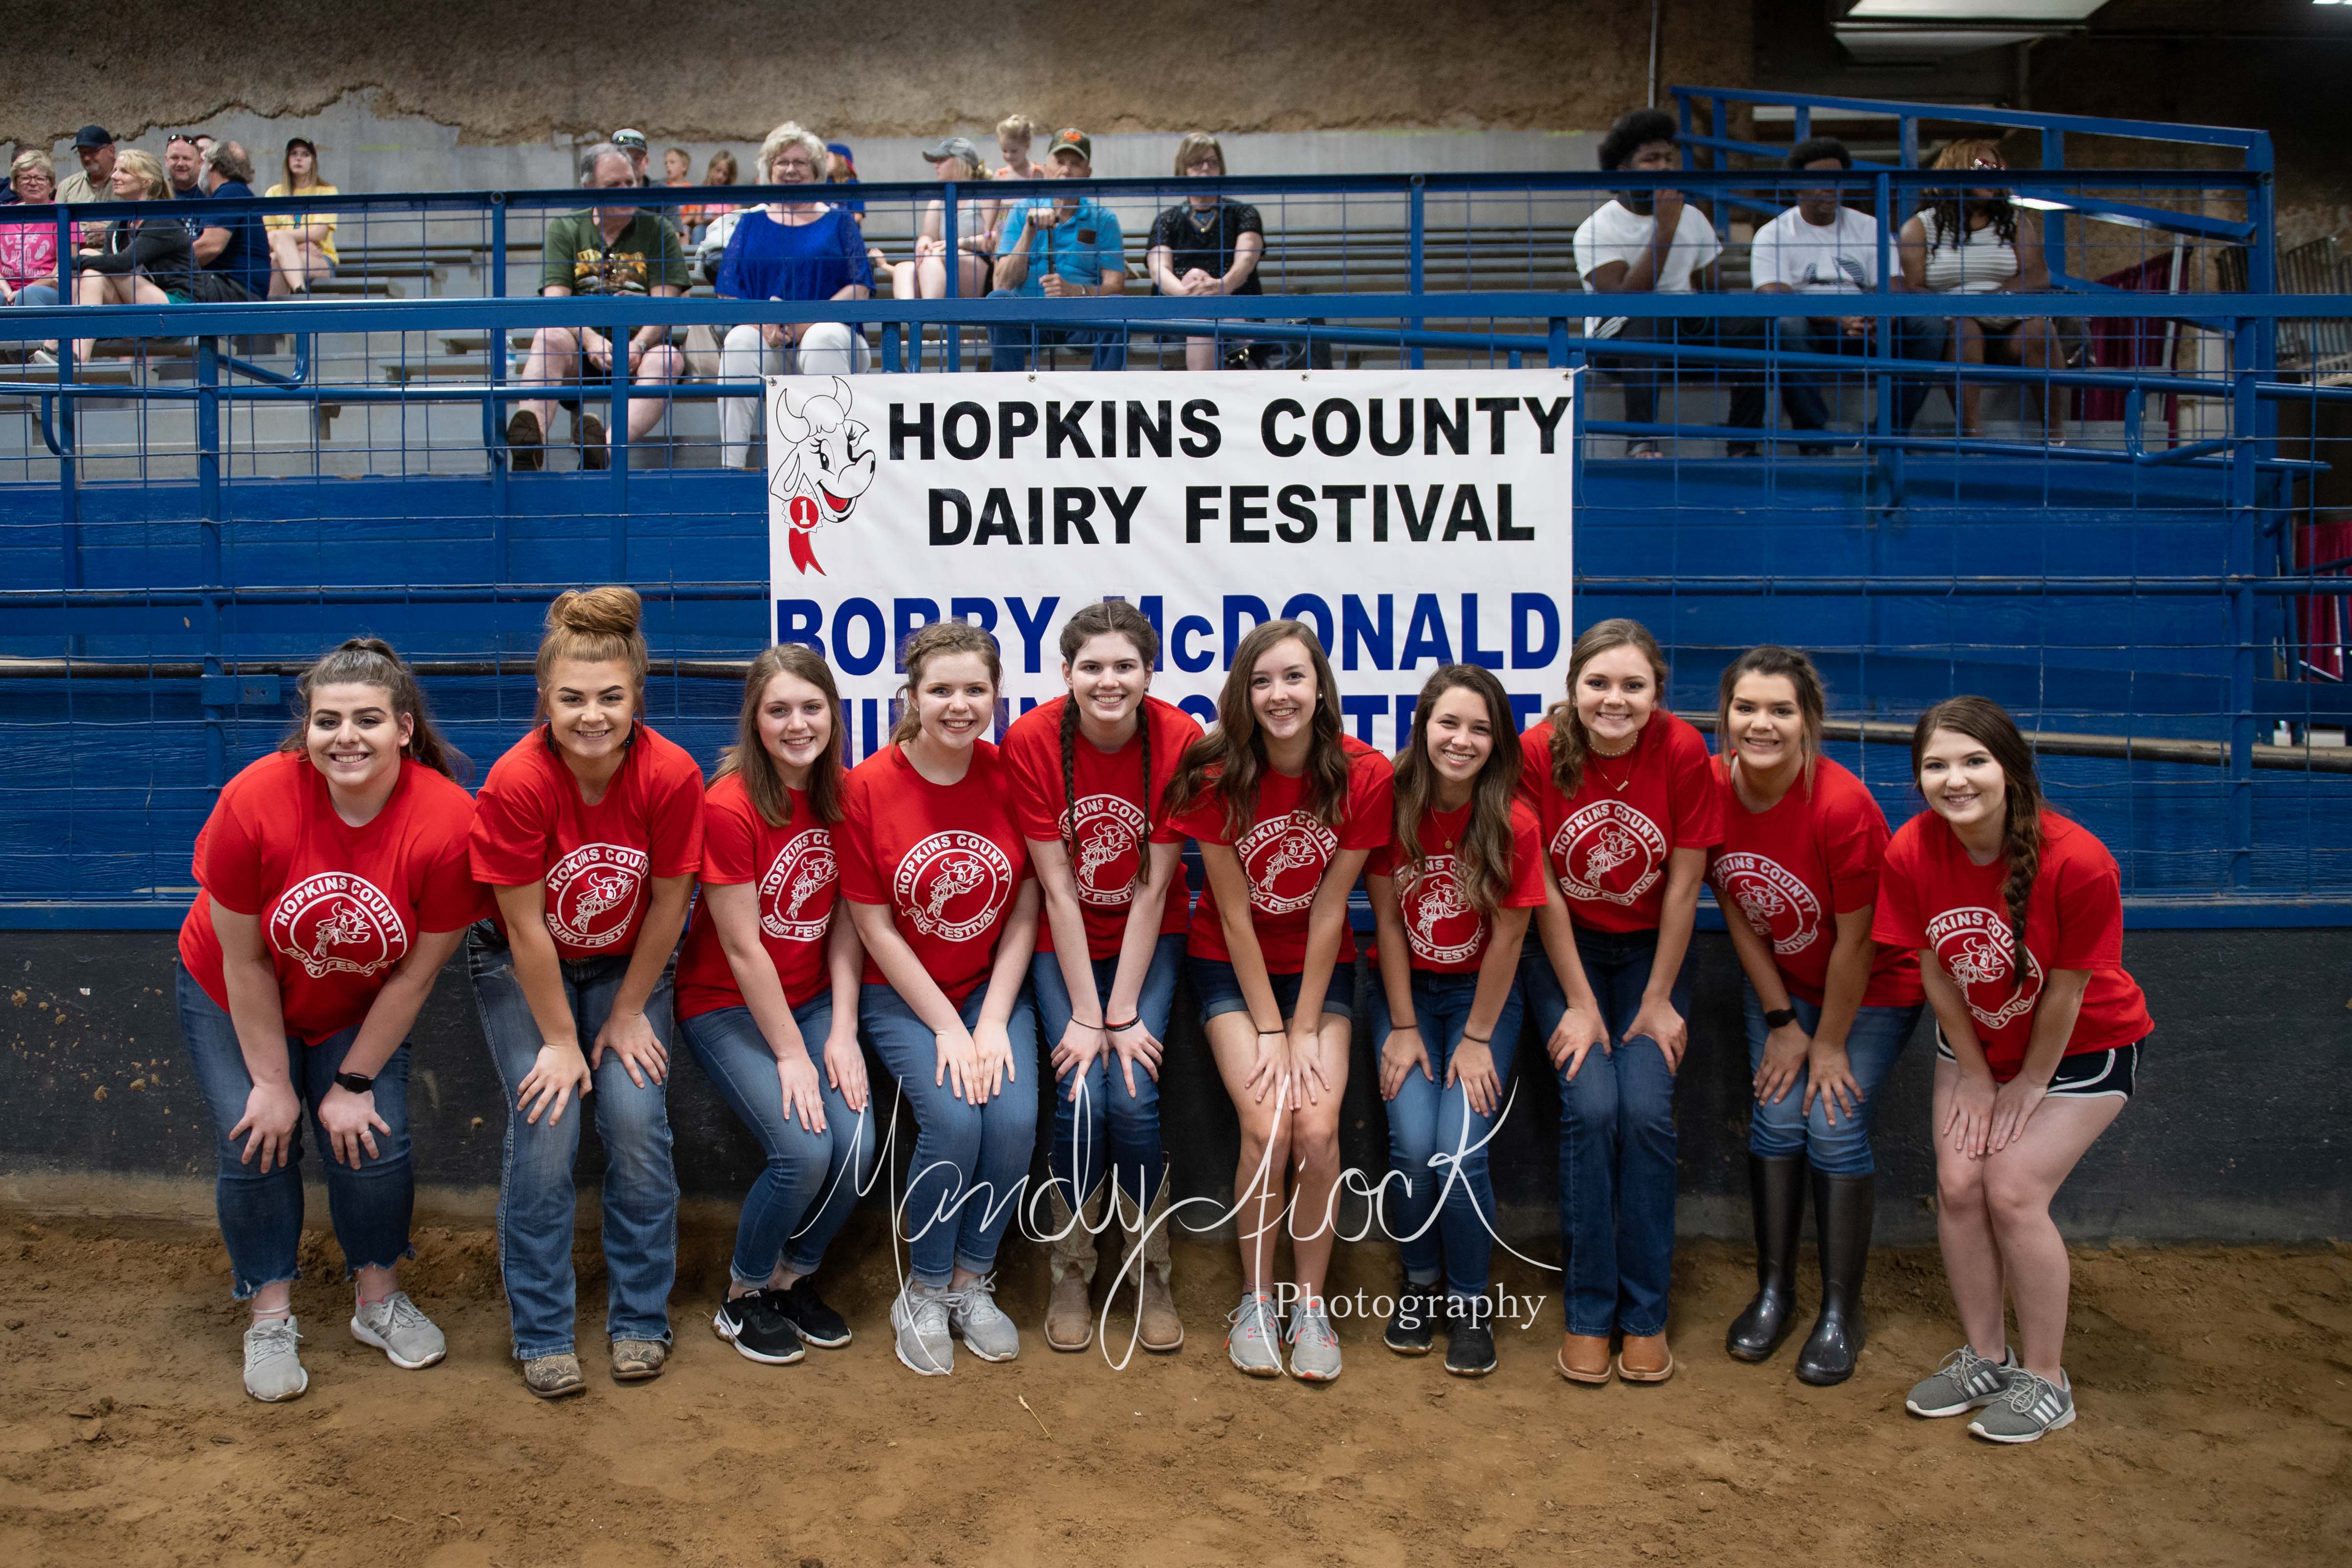 2019 Dairy Festival Pageant Contestants Compete in Bobby McDonald Milking Contest